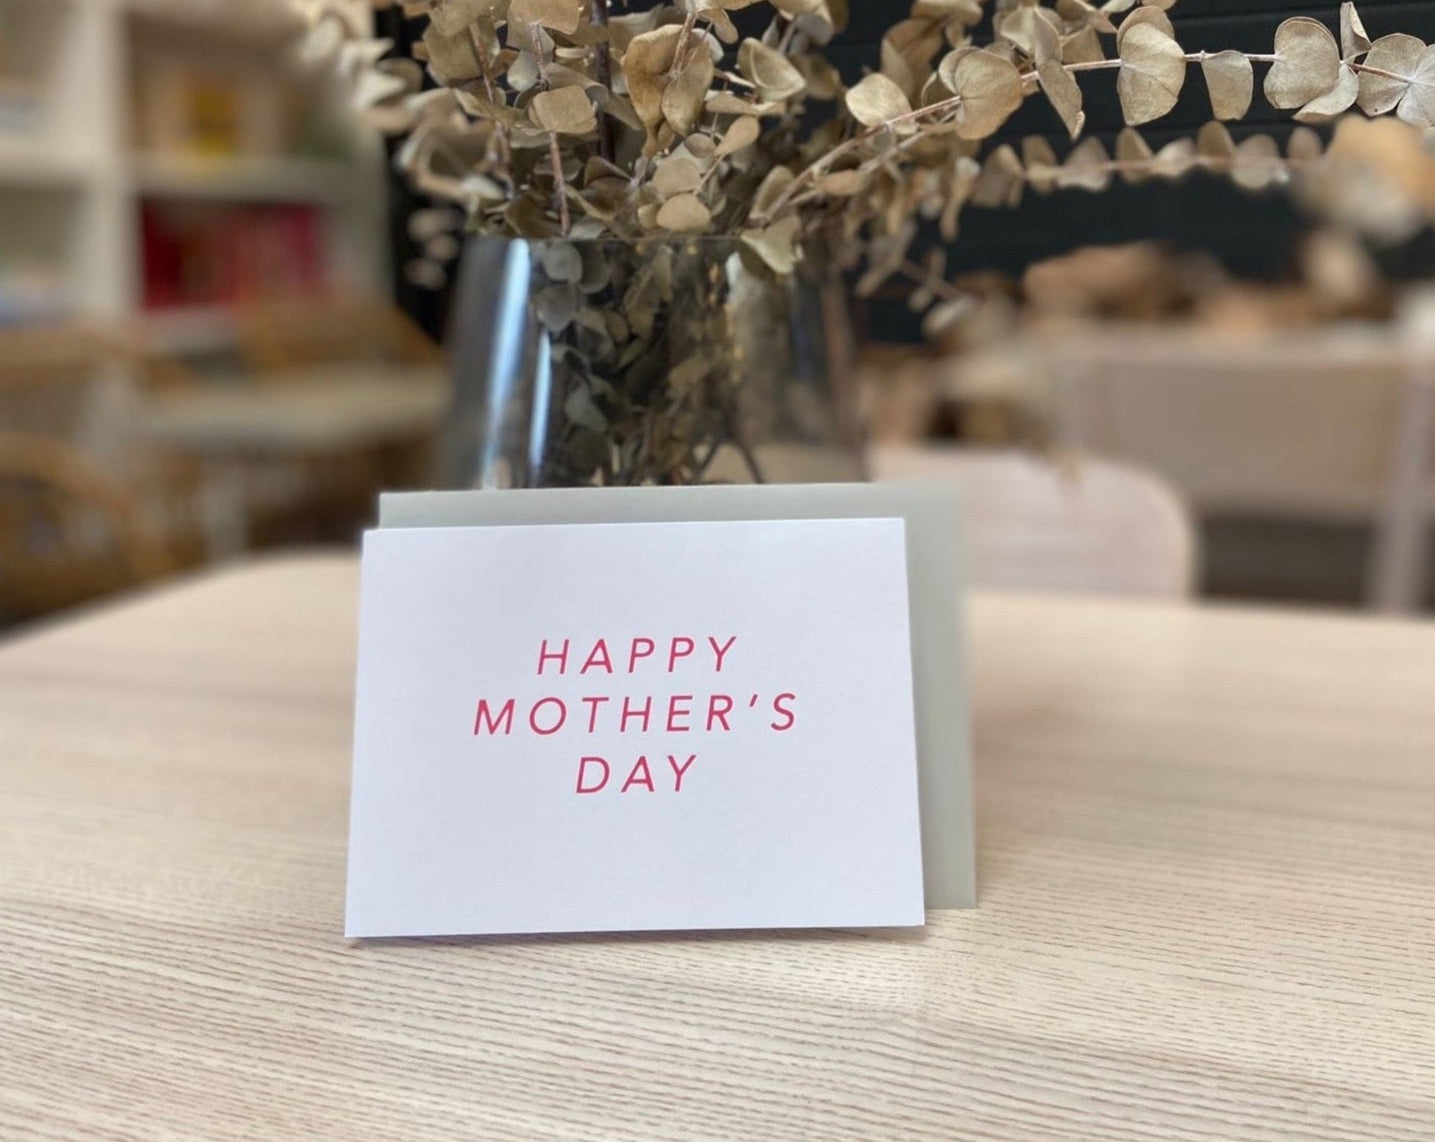 HAPPY MOTHER’S DAY CARD